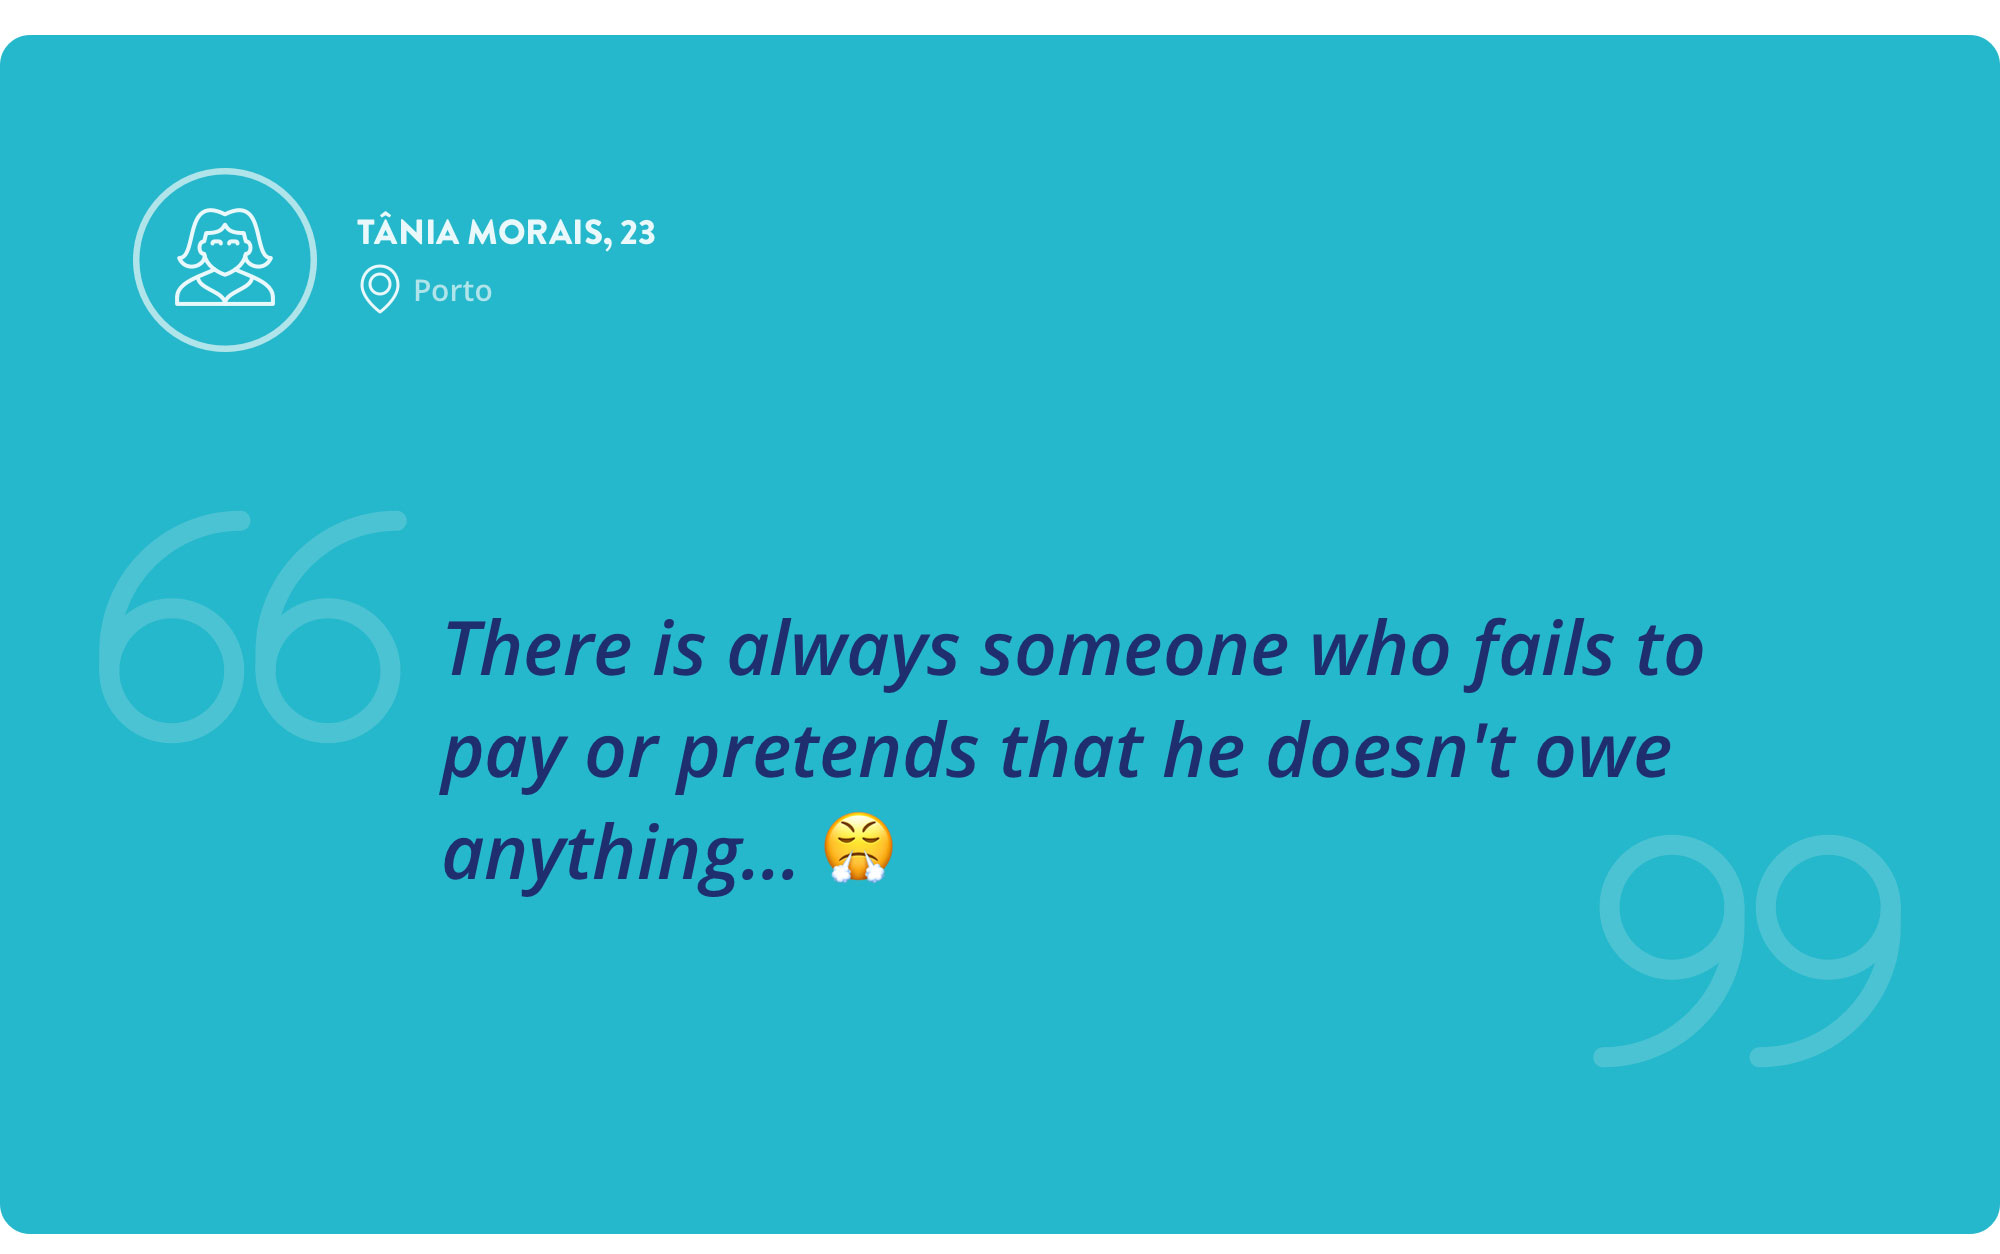 Interview quote by Tânia Morais, 23 years old — There is always someone who fails to pay or pretends that he doesn't owe anything